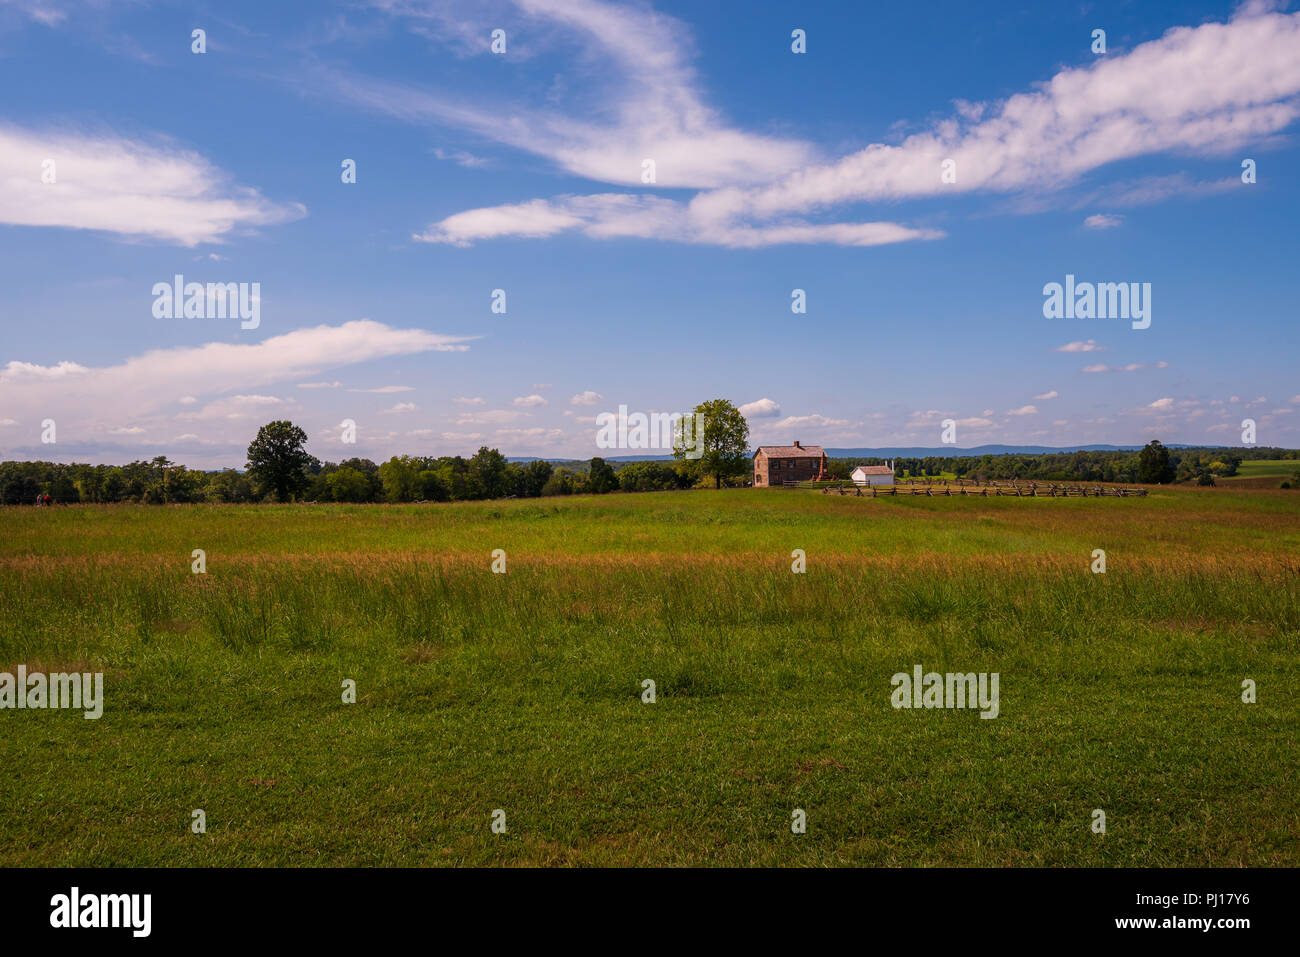 A wide-angle photo of the farm that became the Manassas battle of the U.S. Civil War in July 1861. Stock Photo